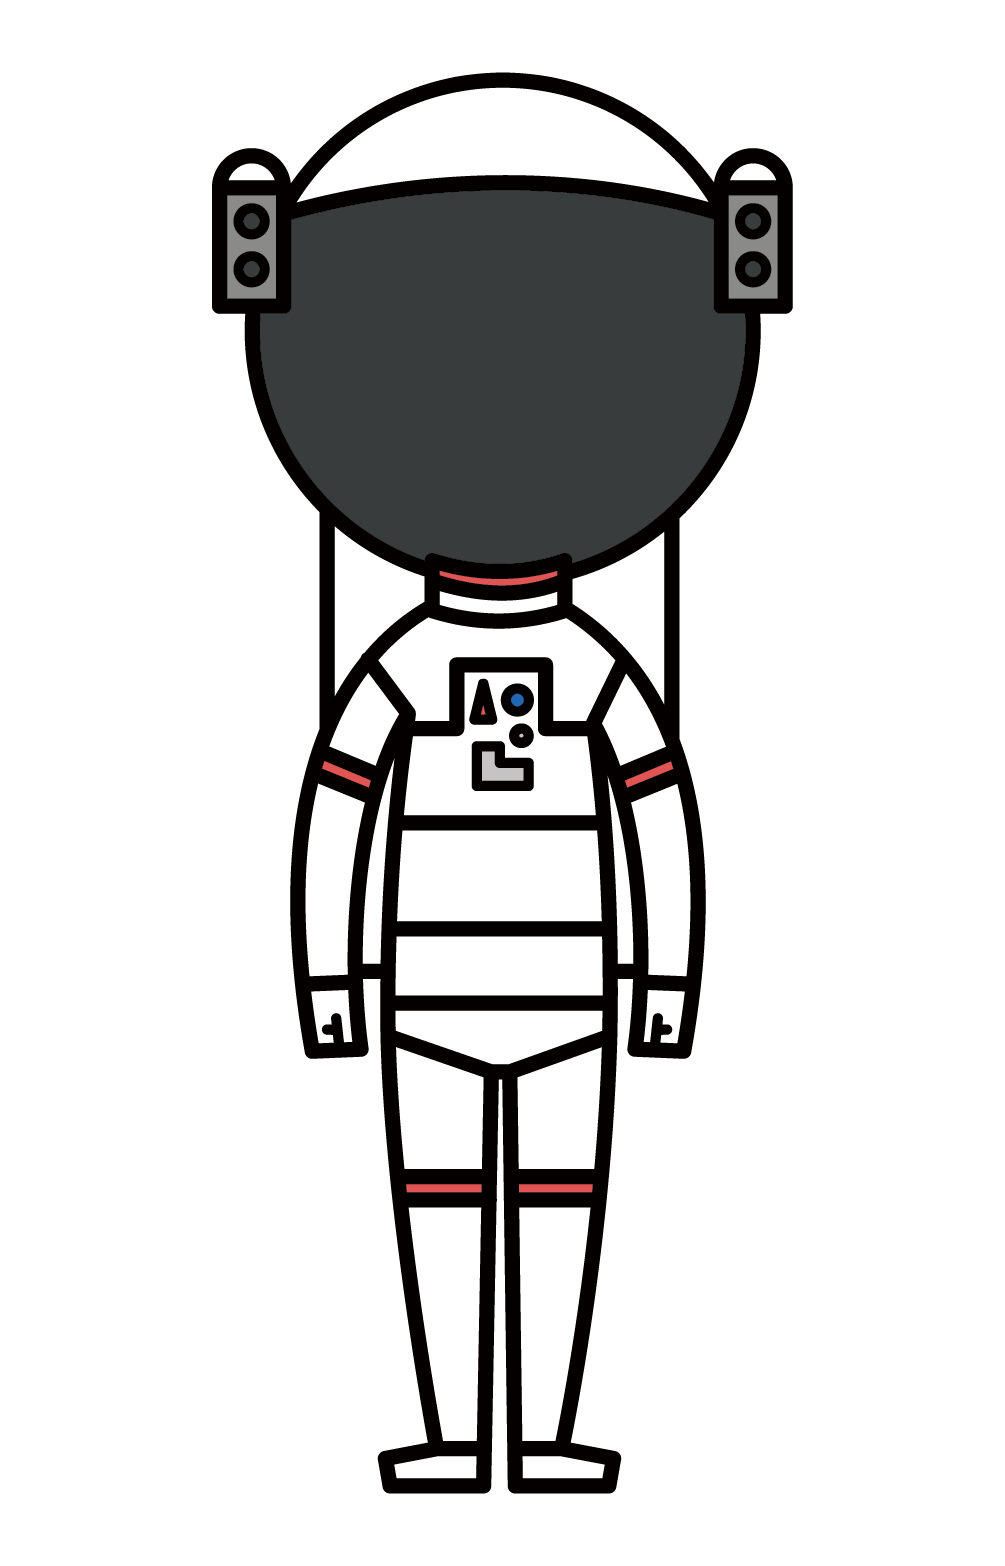 Illustration of a spacesuit